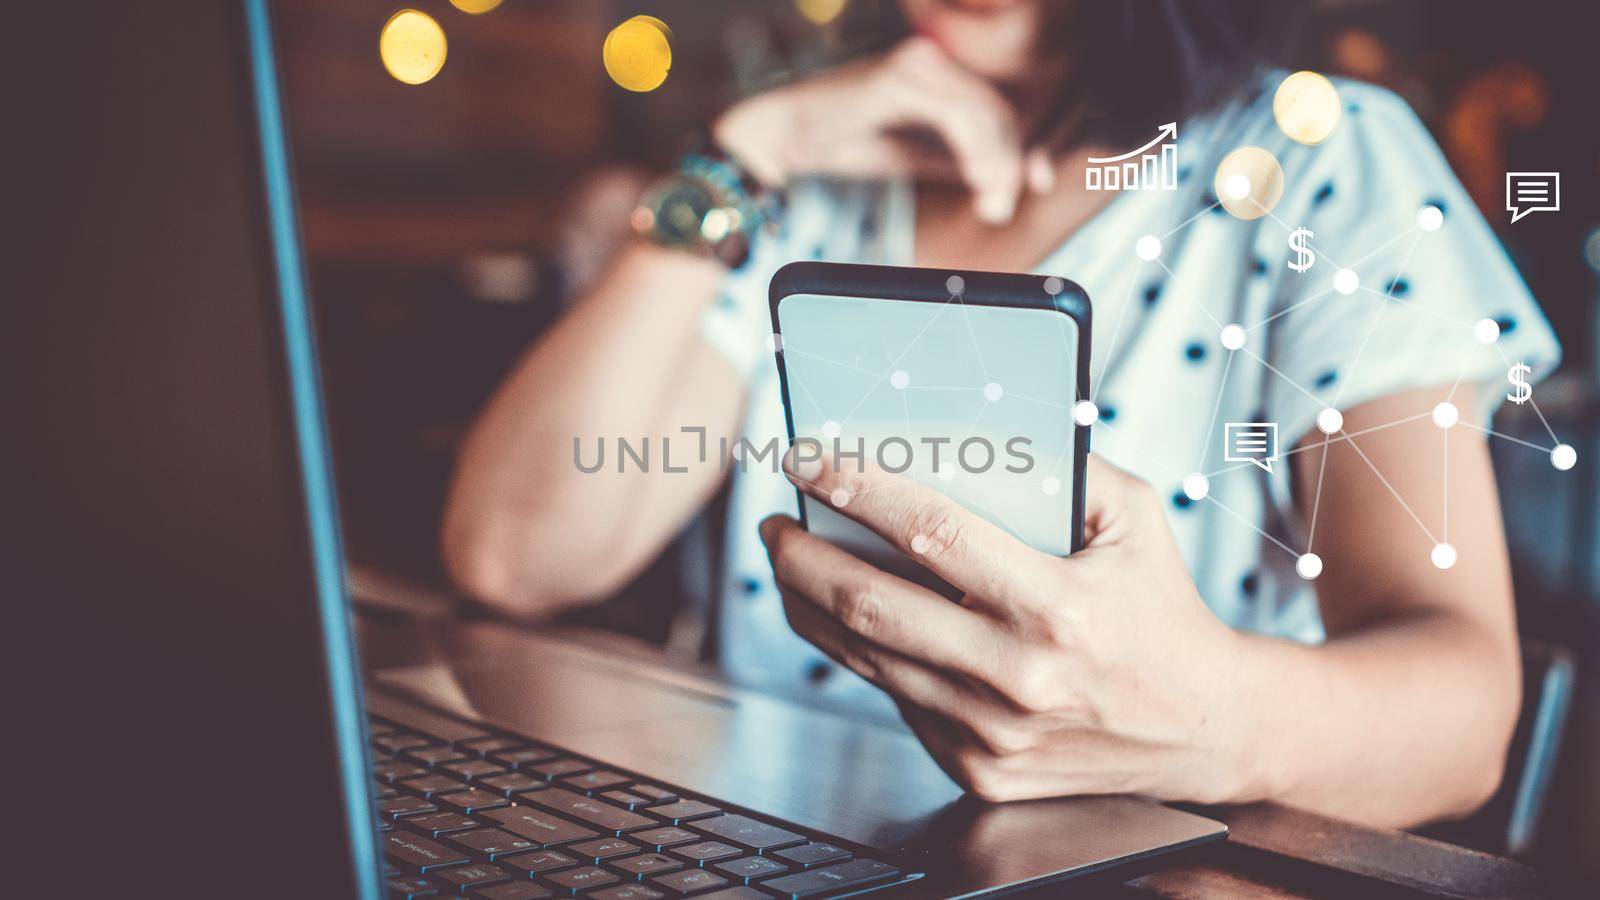  Woman use technology devices smartphone and laptop to work or study do connect communication business concept
